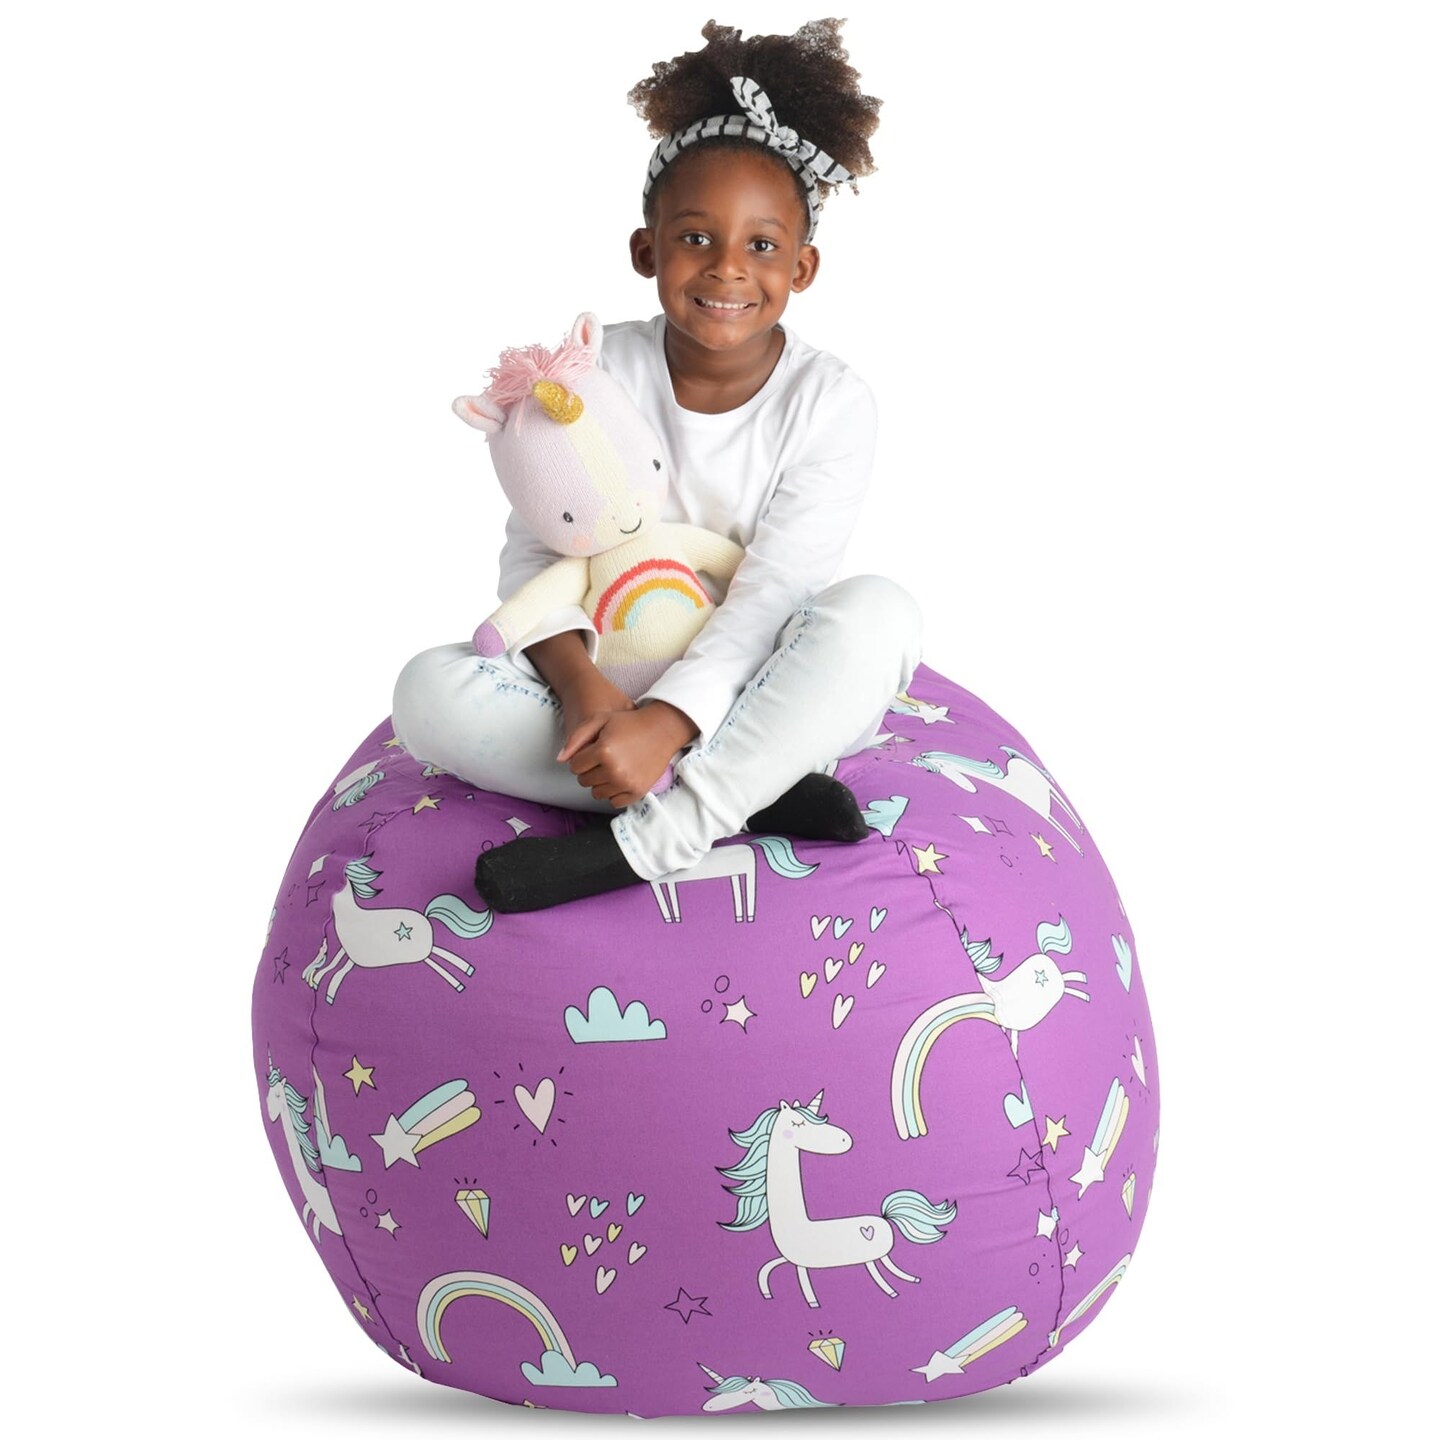 Creative QT Stuff &#x2019;n Sit Extra Large 38&#x2019;&#x2019; Bean Bag Storage Cover for Stuffed Animals &#x26; Toys, Giant Beanbag Chair for Plush, Toddler &#x26; Kids Rooms Bedroom Organizer, Purple Unicorn